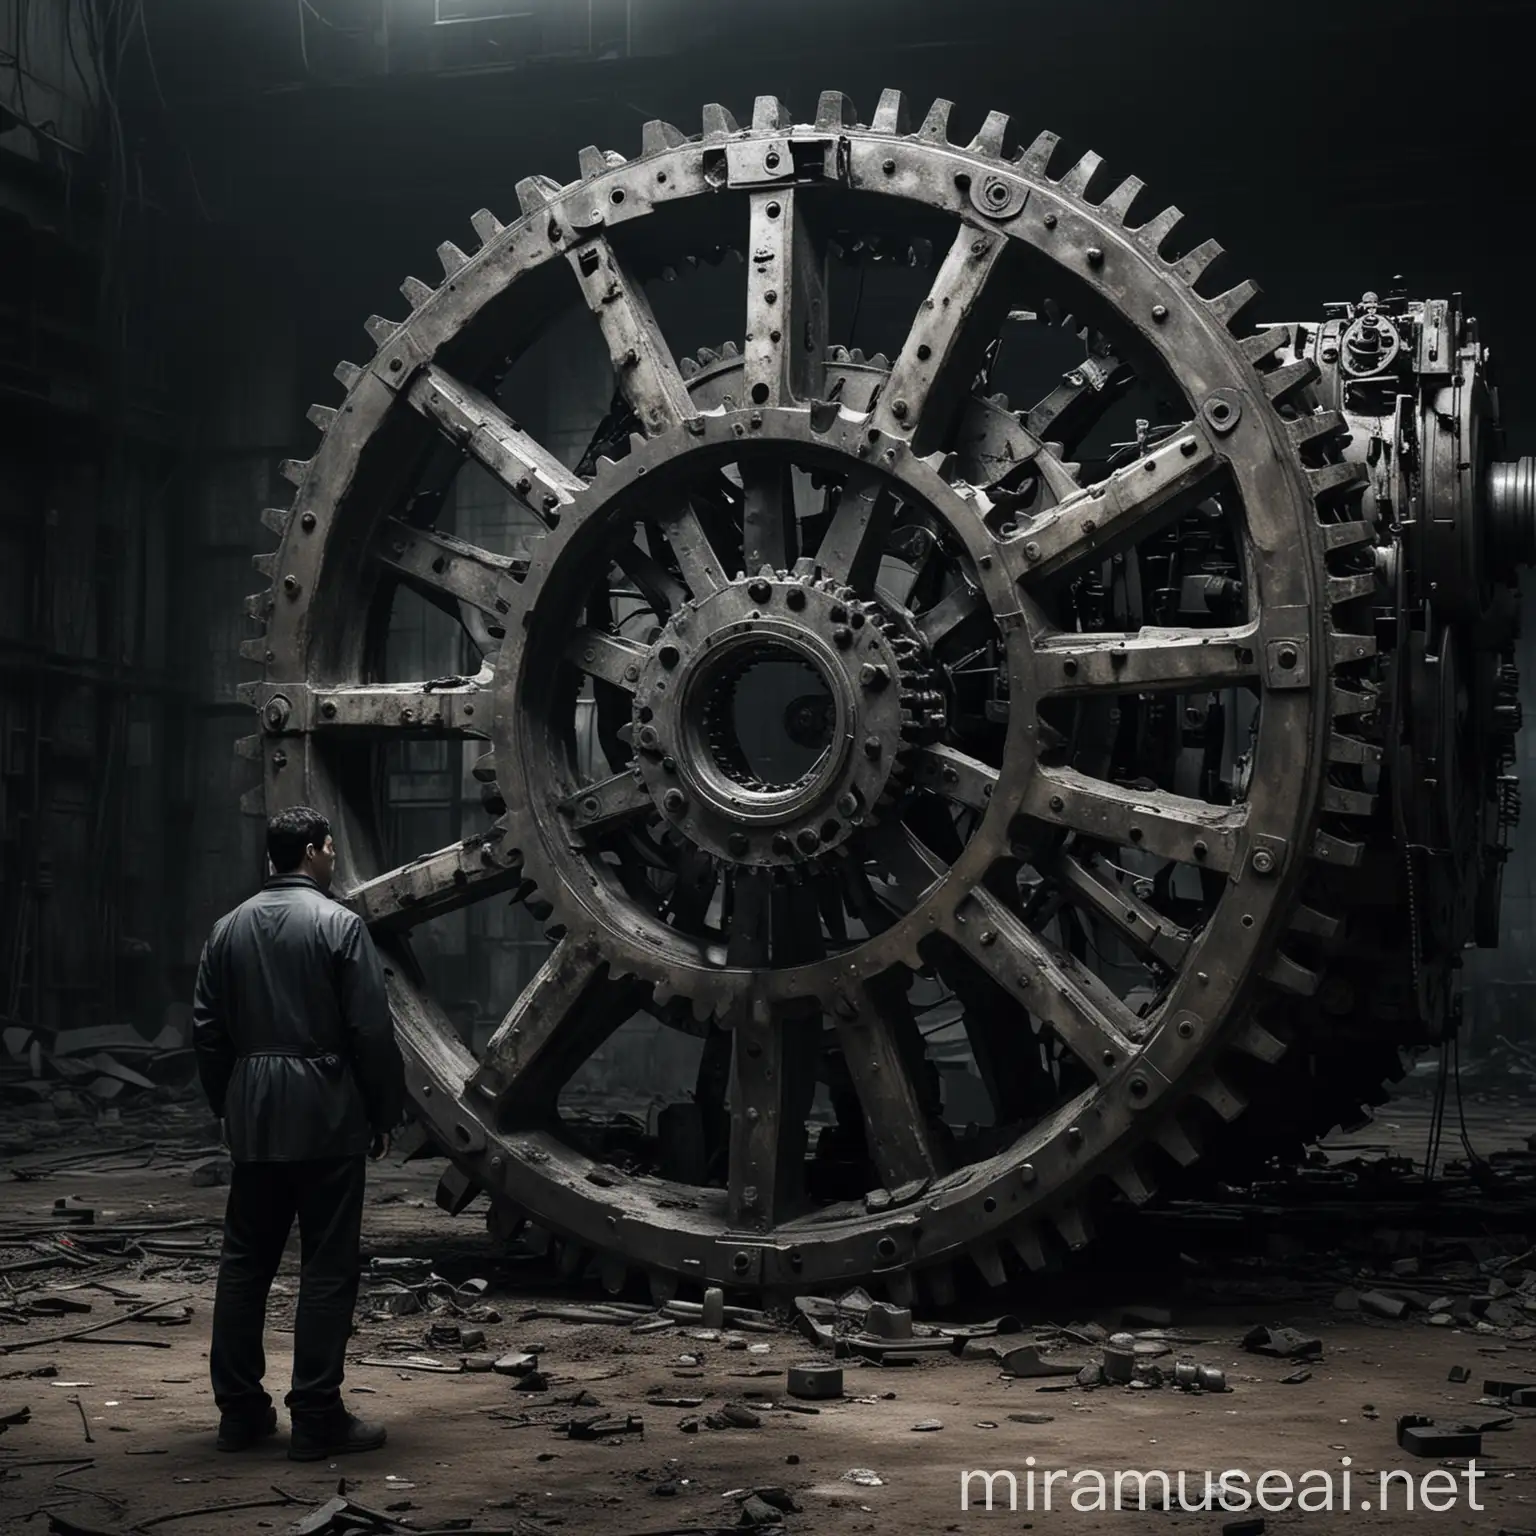 Humanity as Cogs in the Machinery of Technology A Dark and Sad Depiction